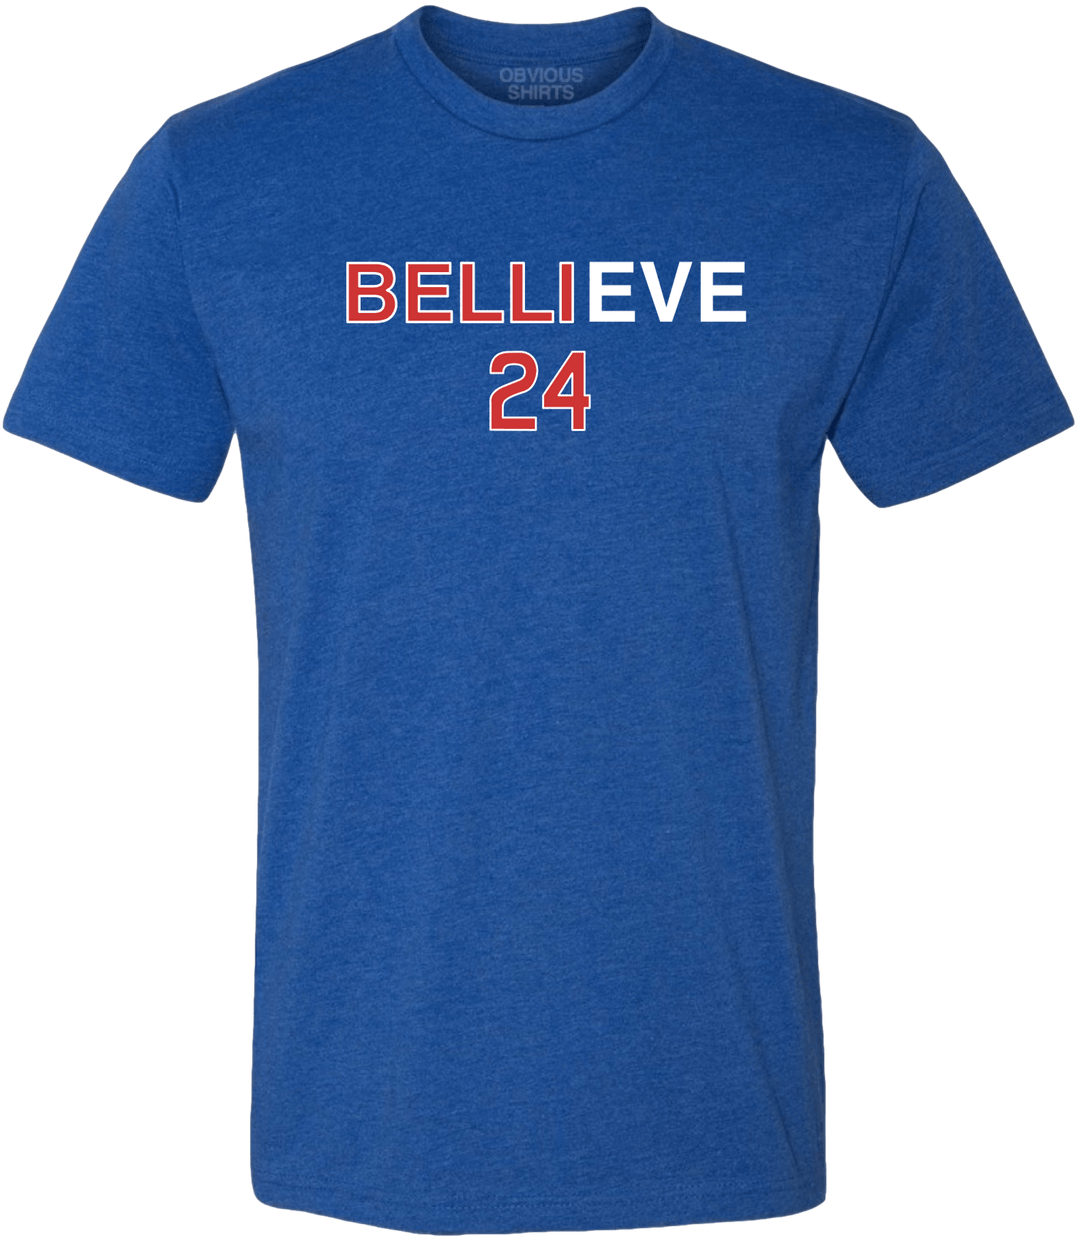 BELLIEVE. - OBVIOUS SHIRTS